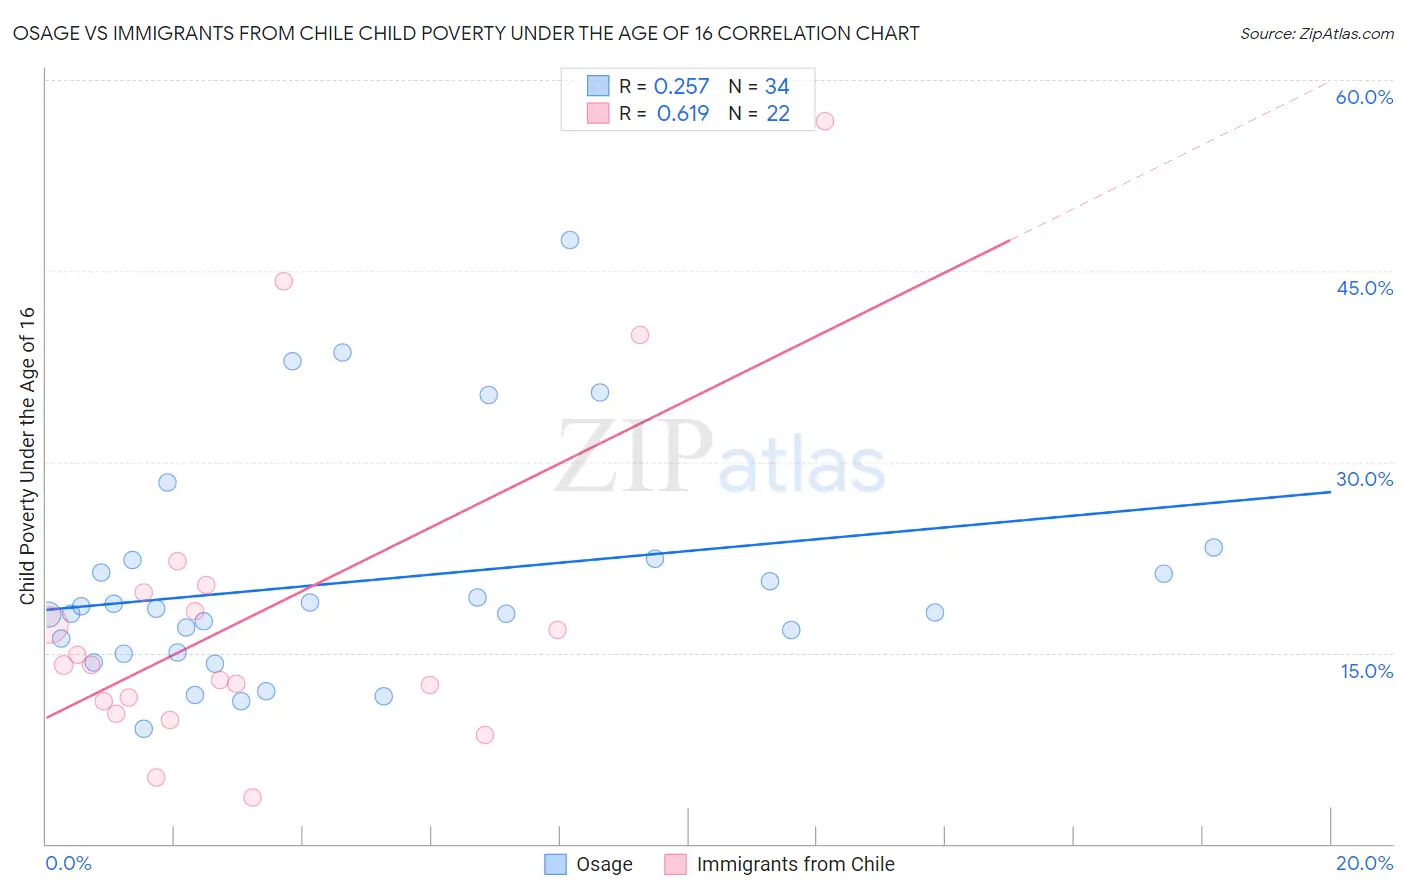 Osage vs Immigrants from Chile Child Poverty Under the Age of 16